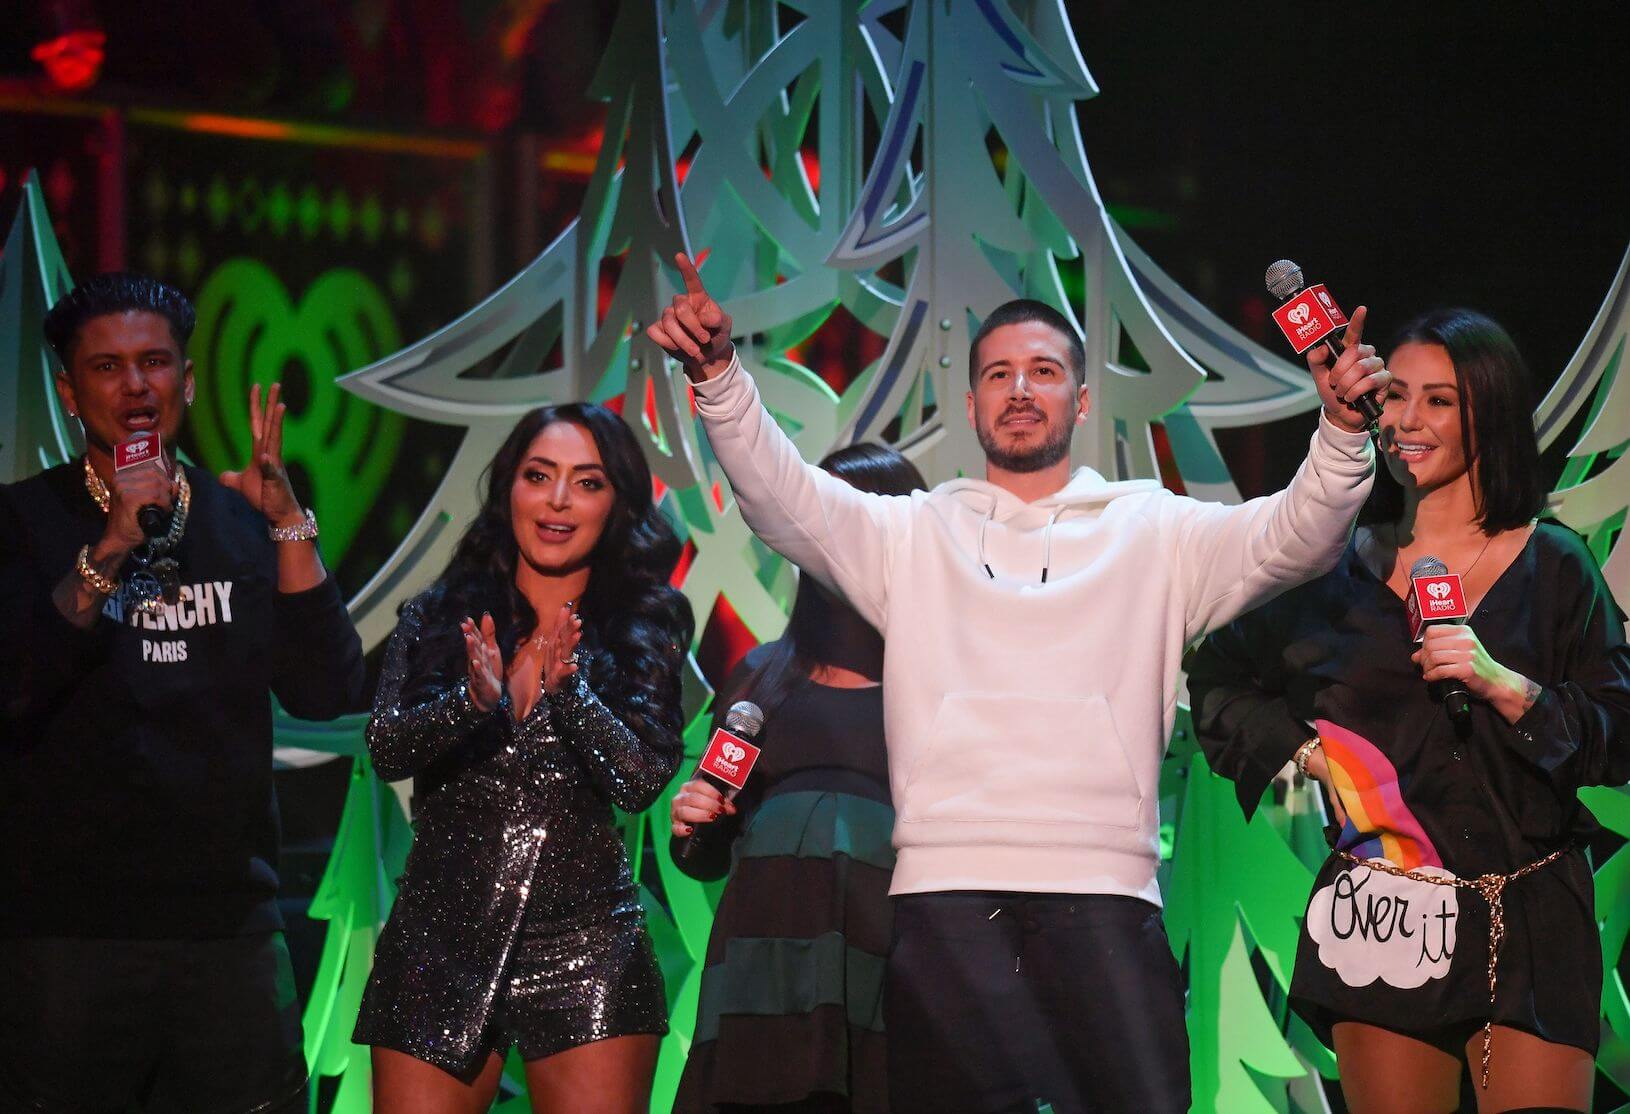 Pauly D, Angelina Pivarnick, Deena Nicole, Vinny Guadagino, and Jenni Farley from 'Jersey Shore: Family Vacation' standing on stage in front of Christmas tree decorations